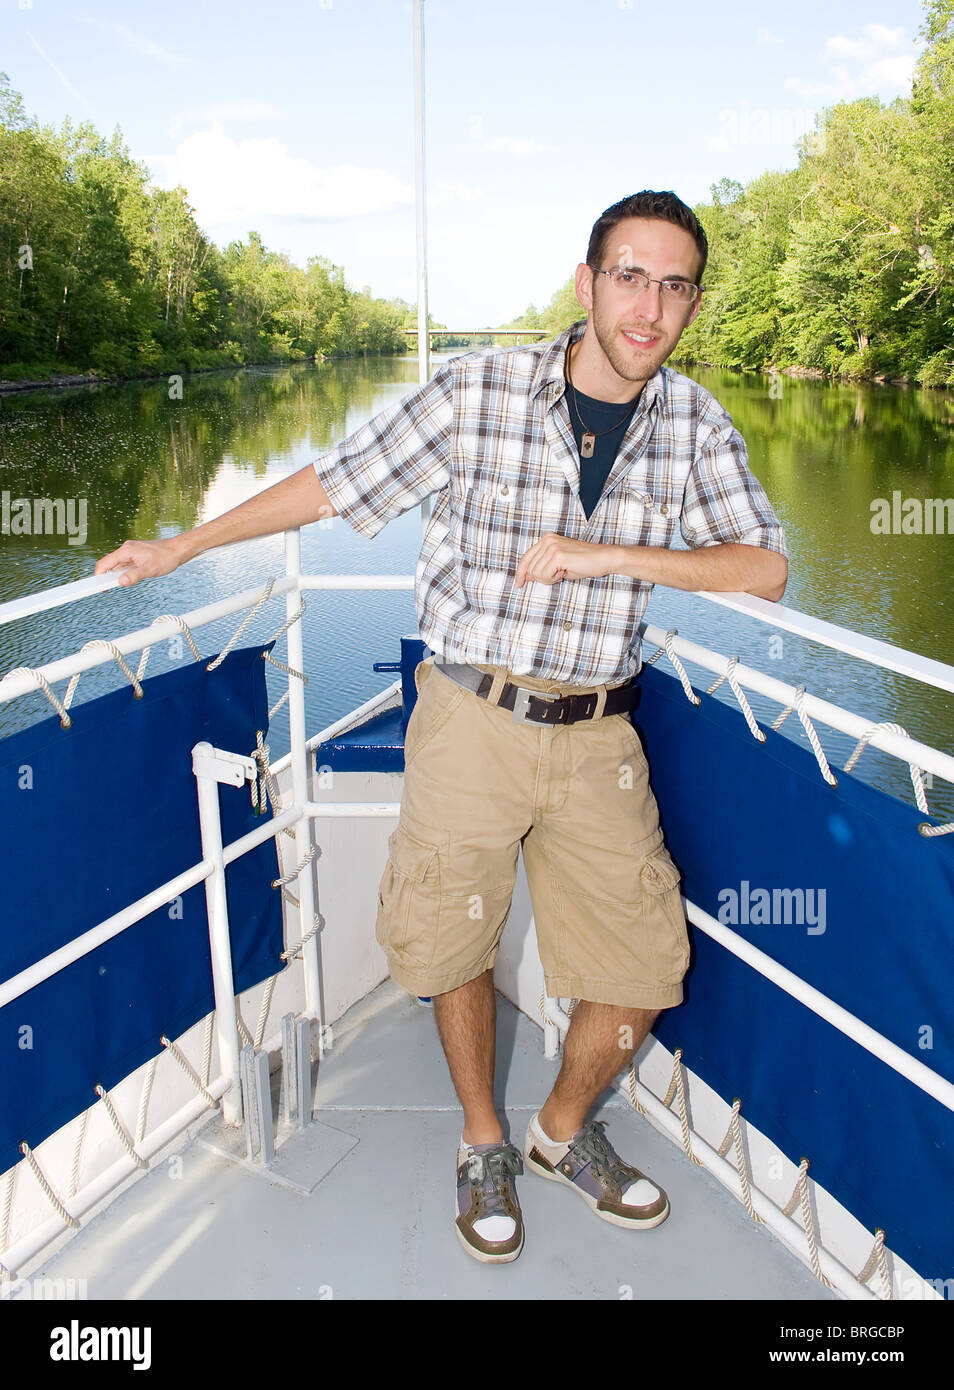 one young adult male with glasses on the front of a boat giving a tour during a river journey Stock Photo